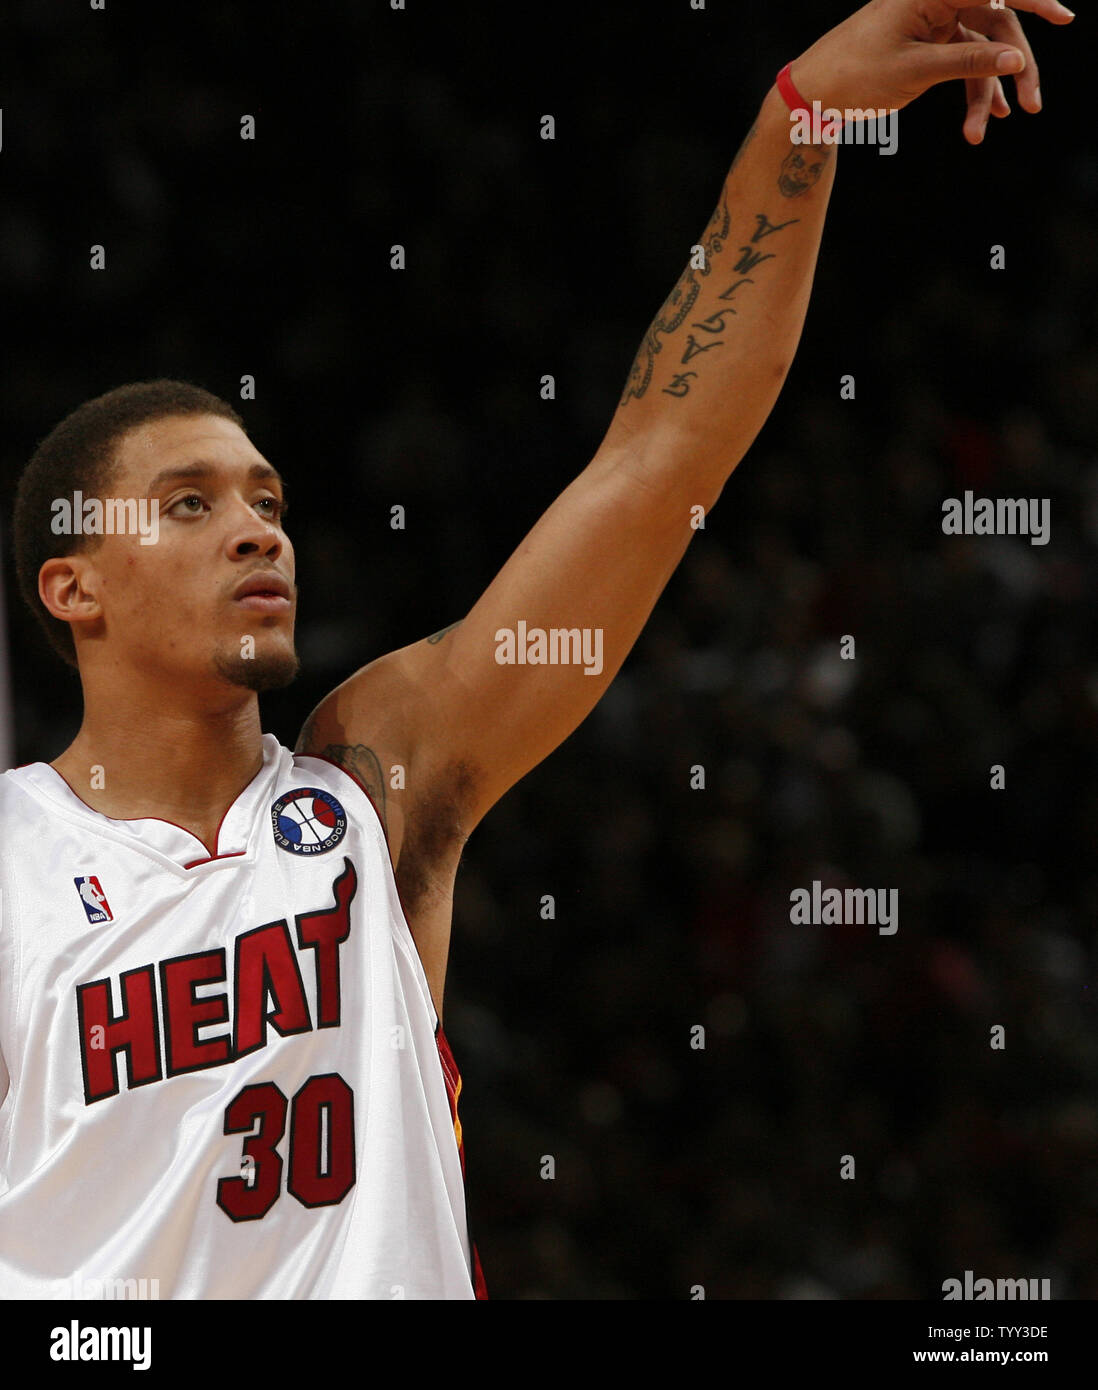 Miami Heat rookie forward Michael Beasley follows through after a shot during an NBA preseason game against the New Jersey Nets in Paris on October 9, 2008